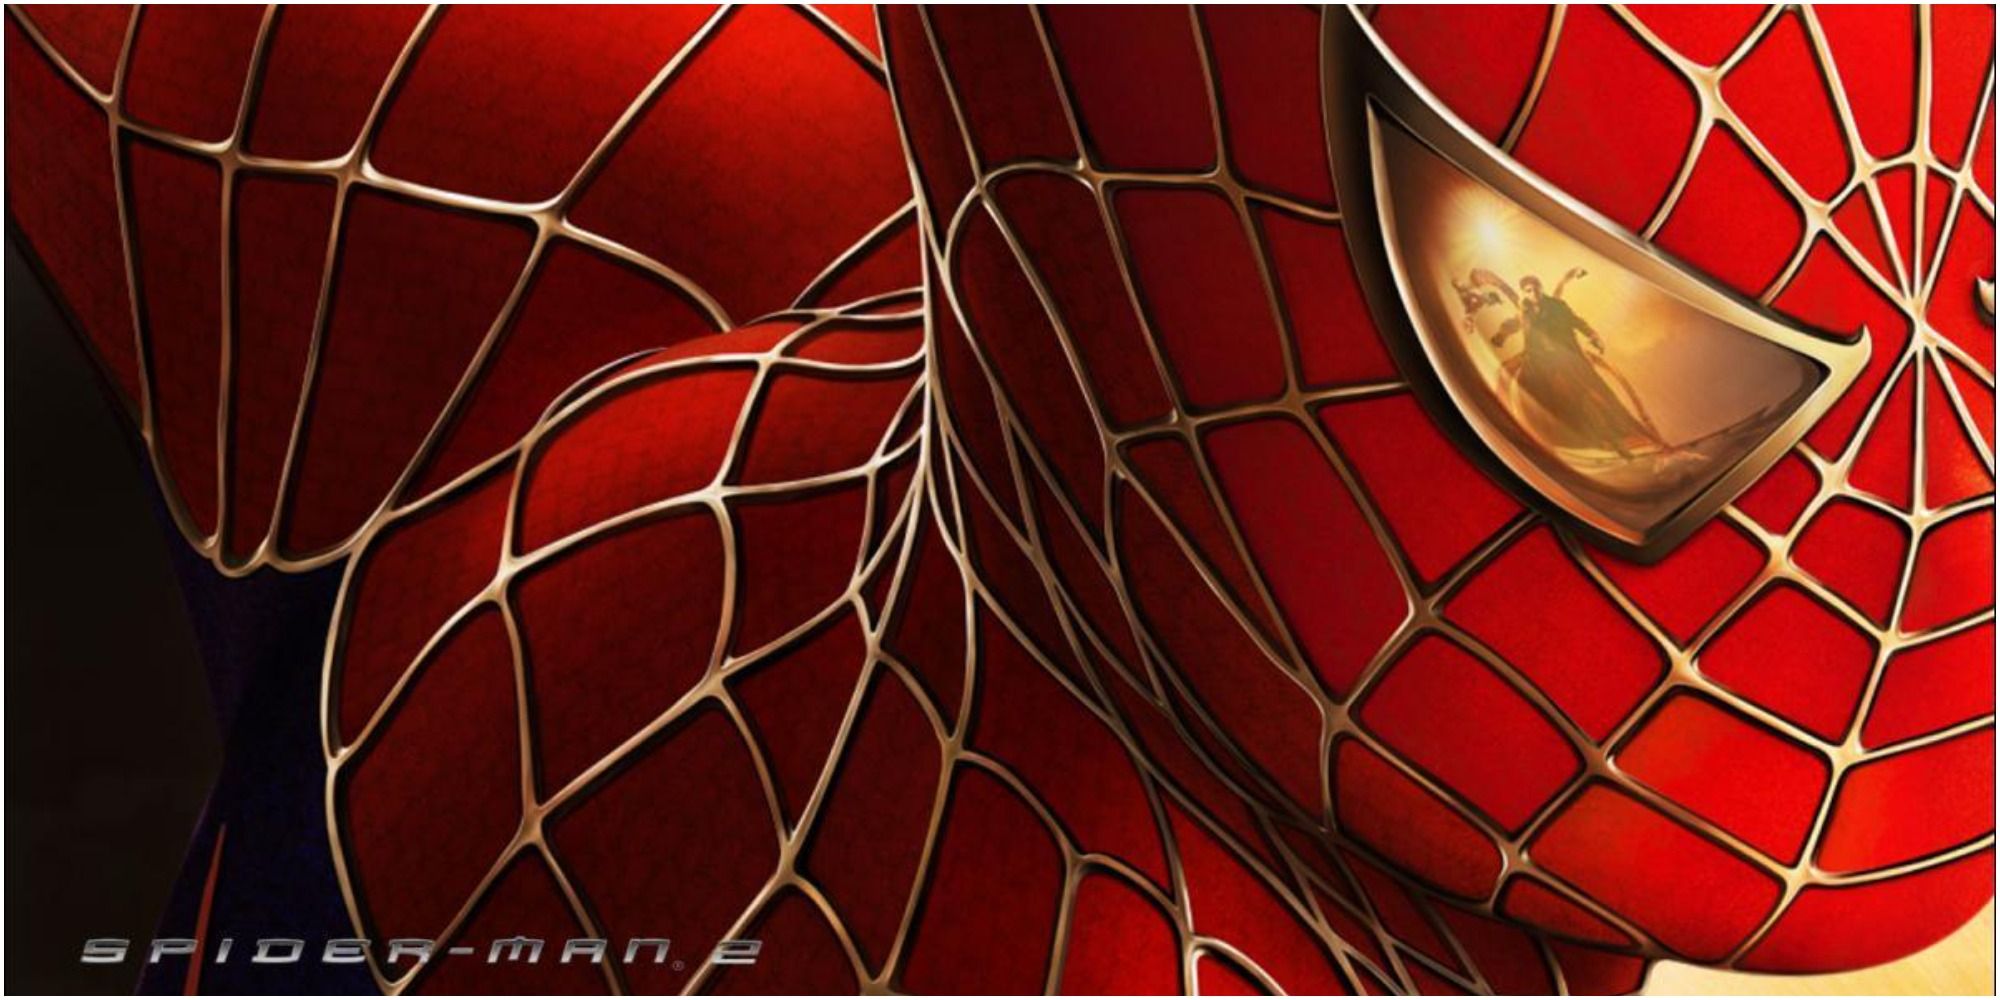 Spider-Man with a close up of Dock Ock for Sam Raimi's Spider-Man 2 movie tie-in game